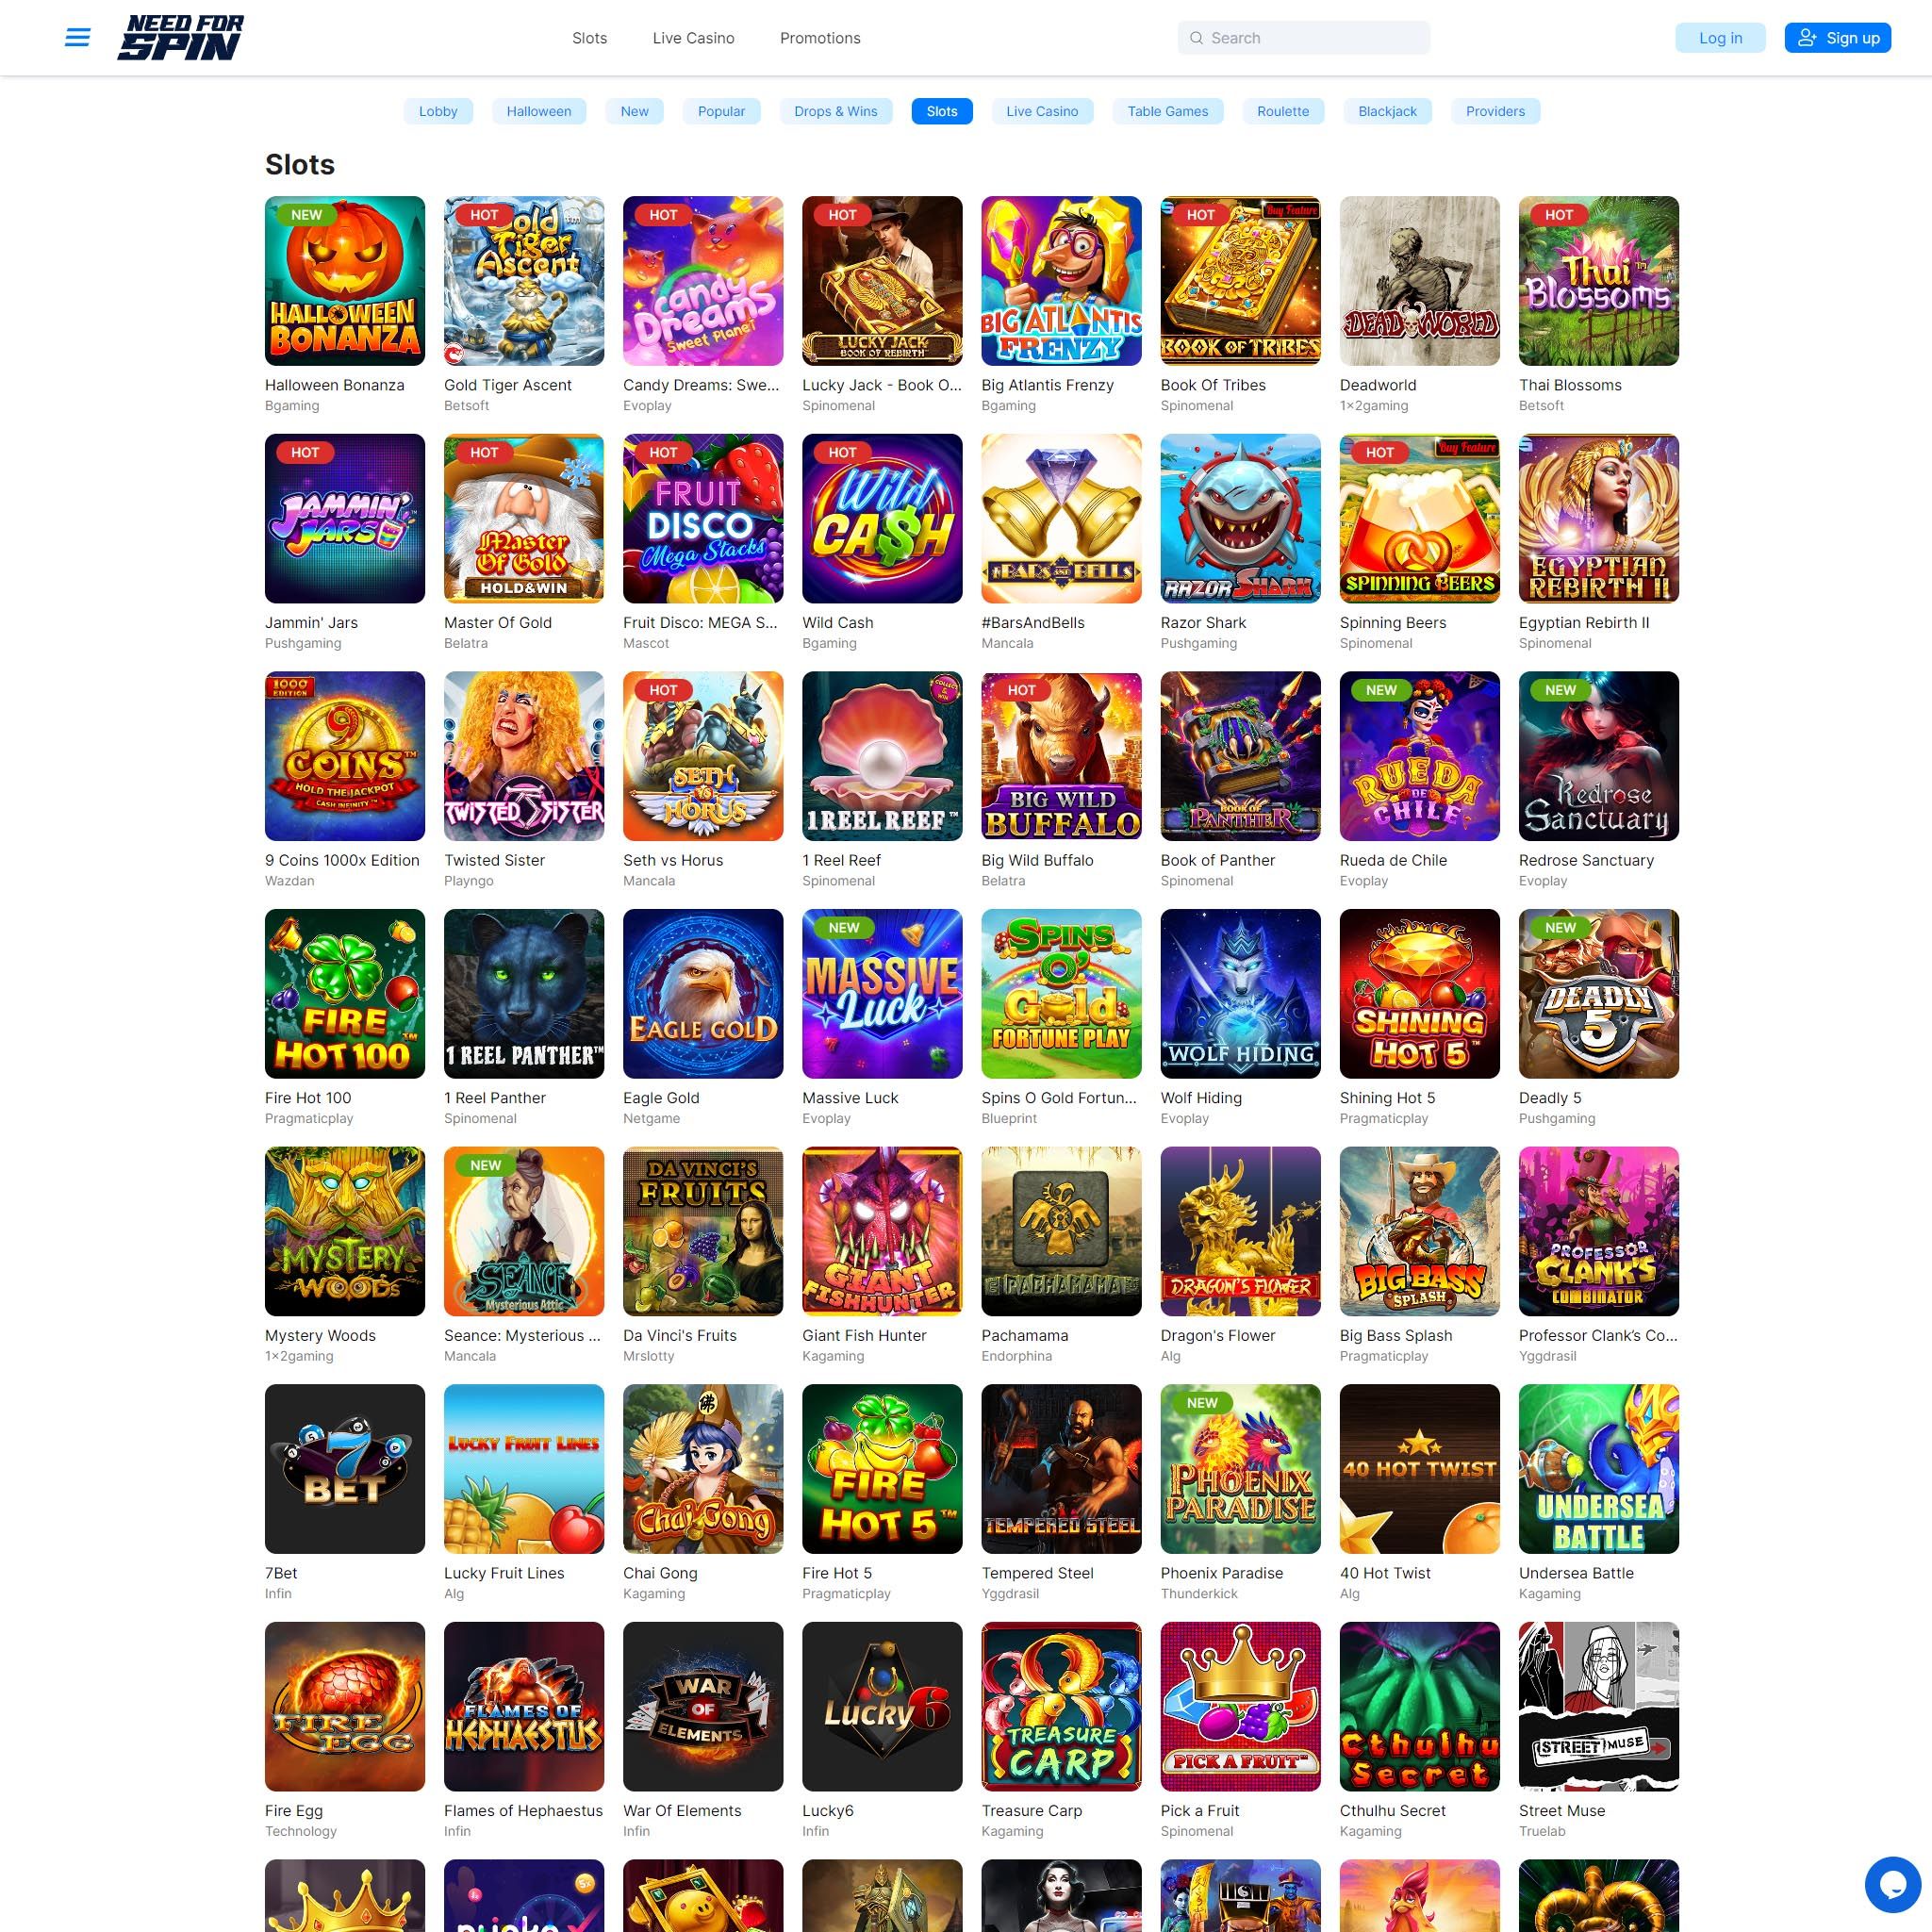 Need for Spin full games catalogue